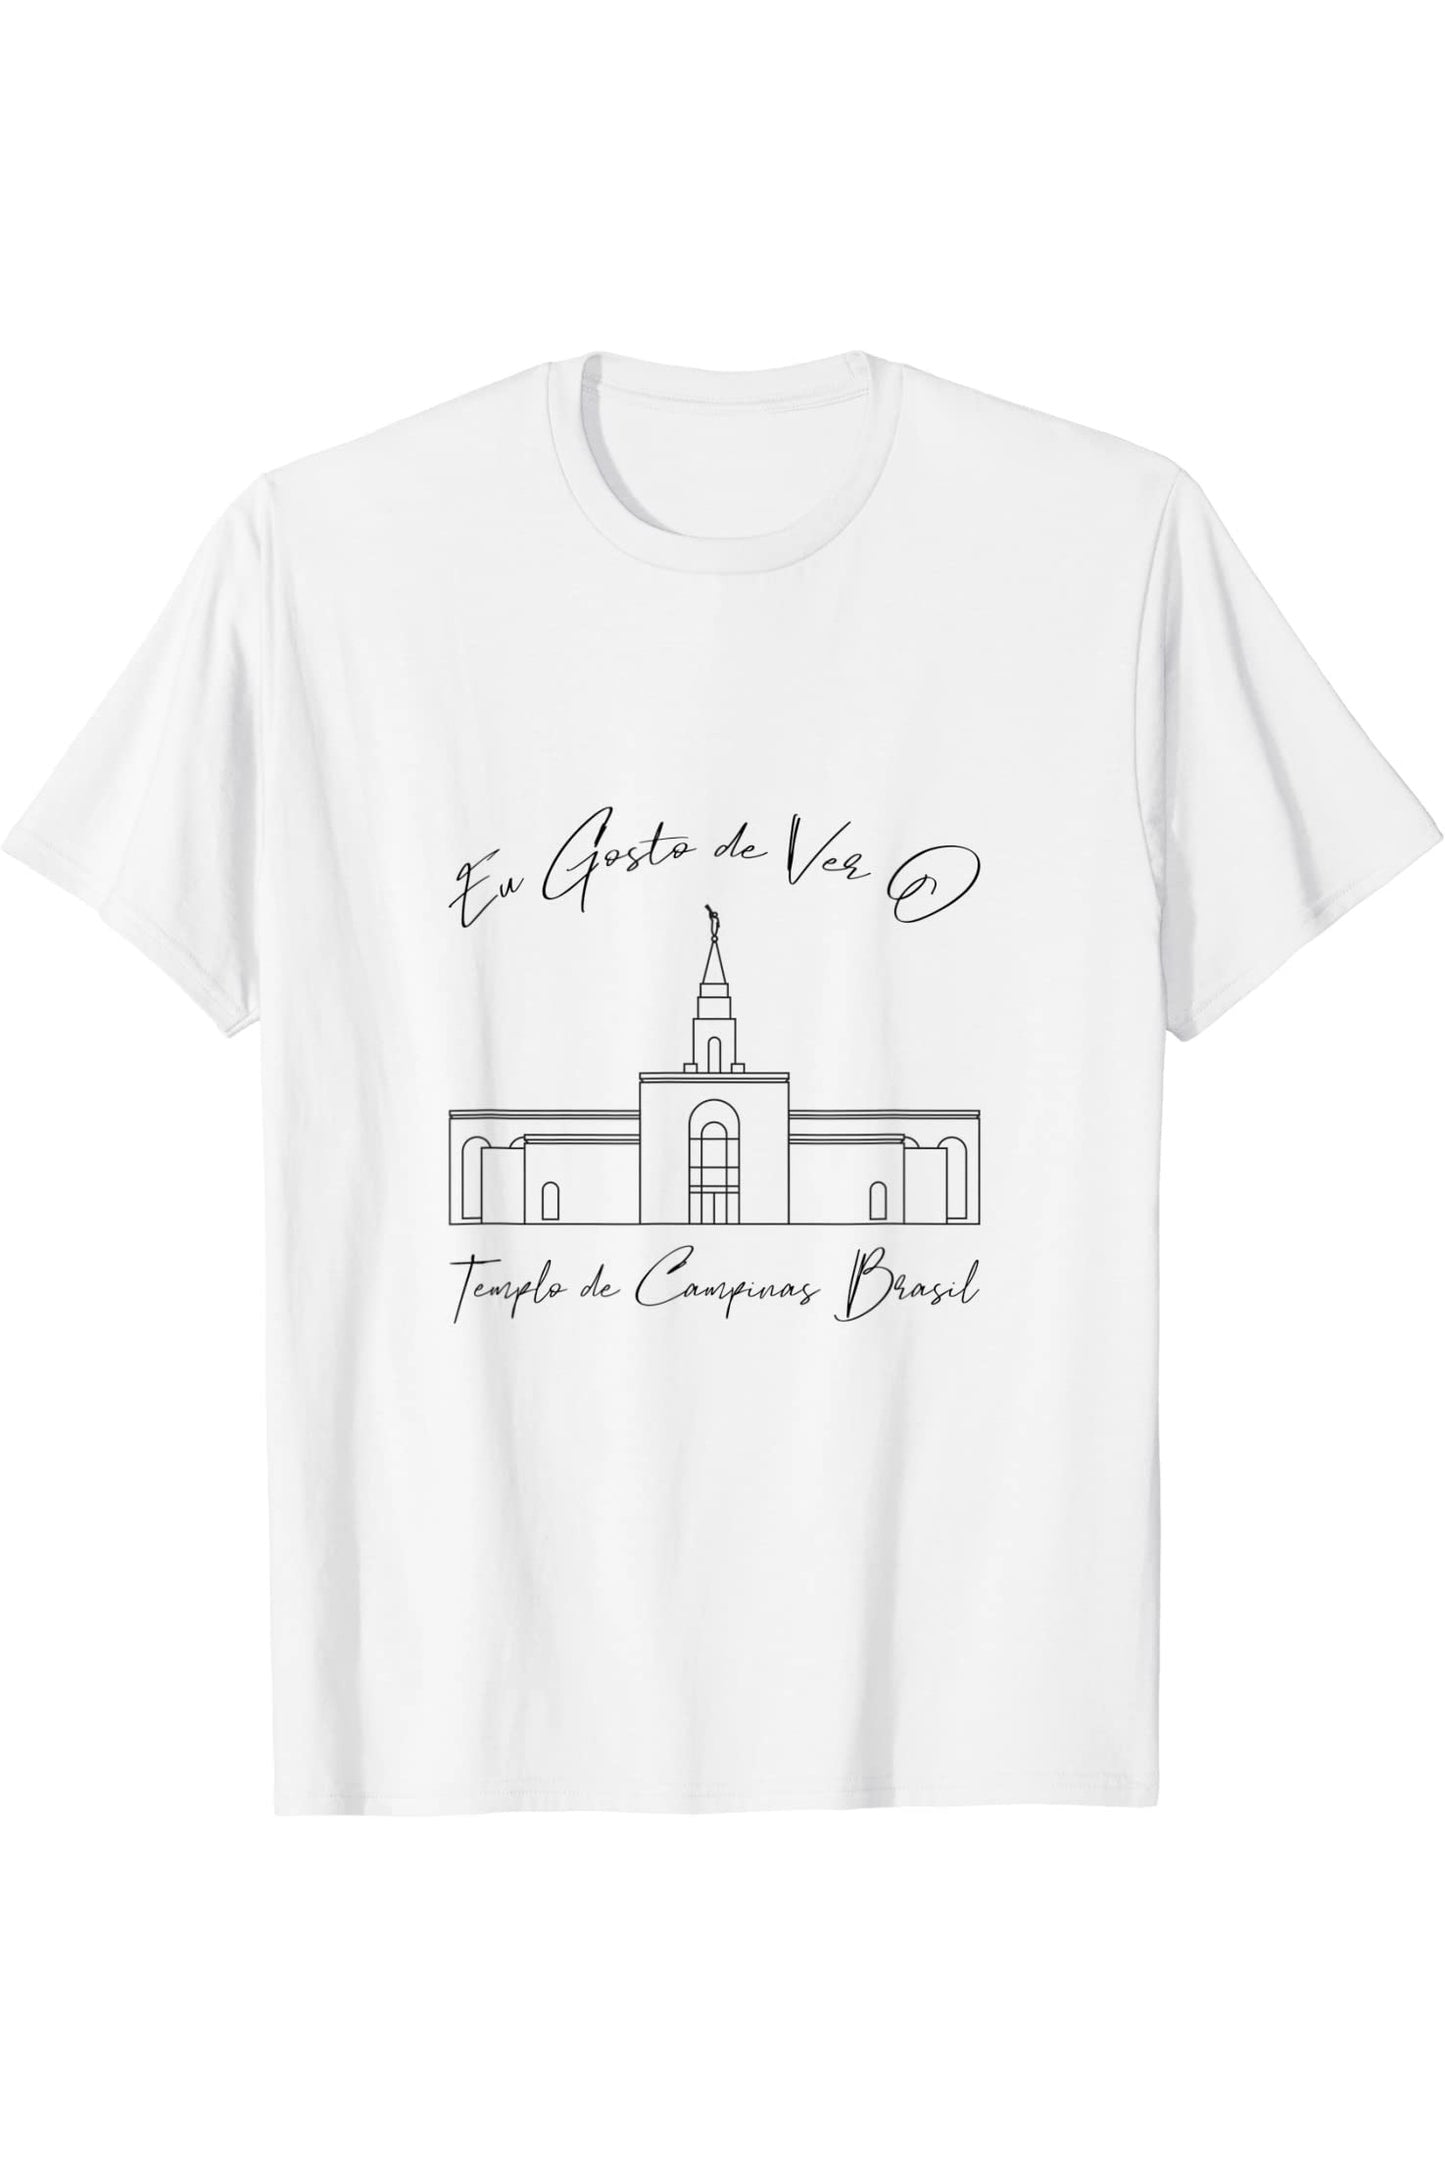 Campinas Brazil Temple T-Shirt - Calligraphy Style (Portuguese) US